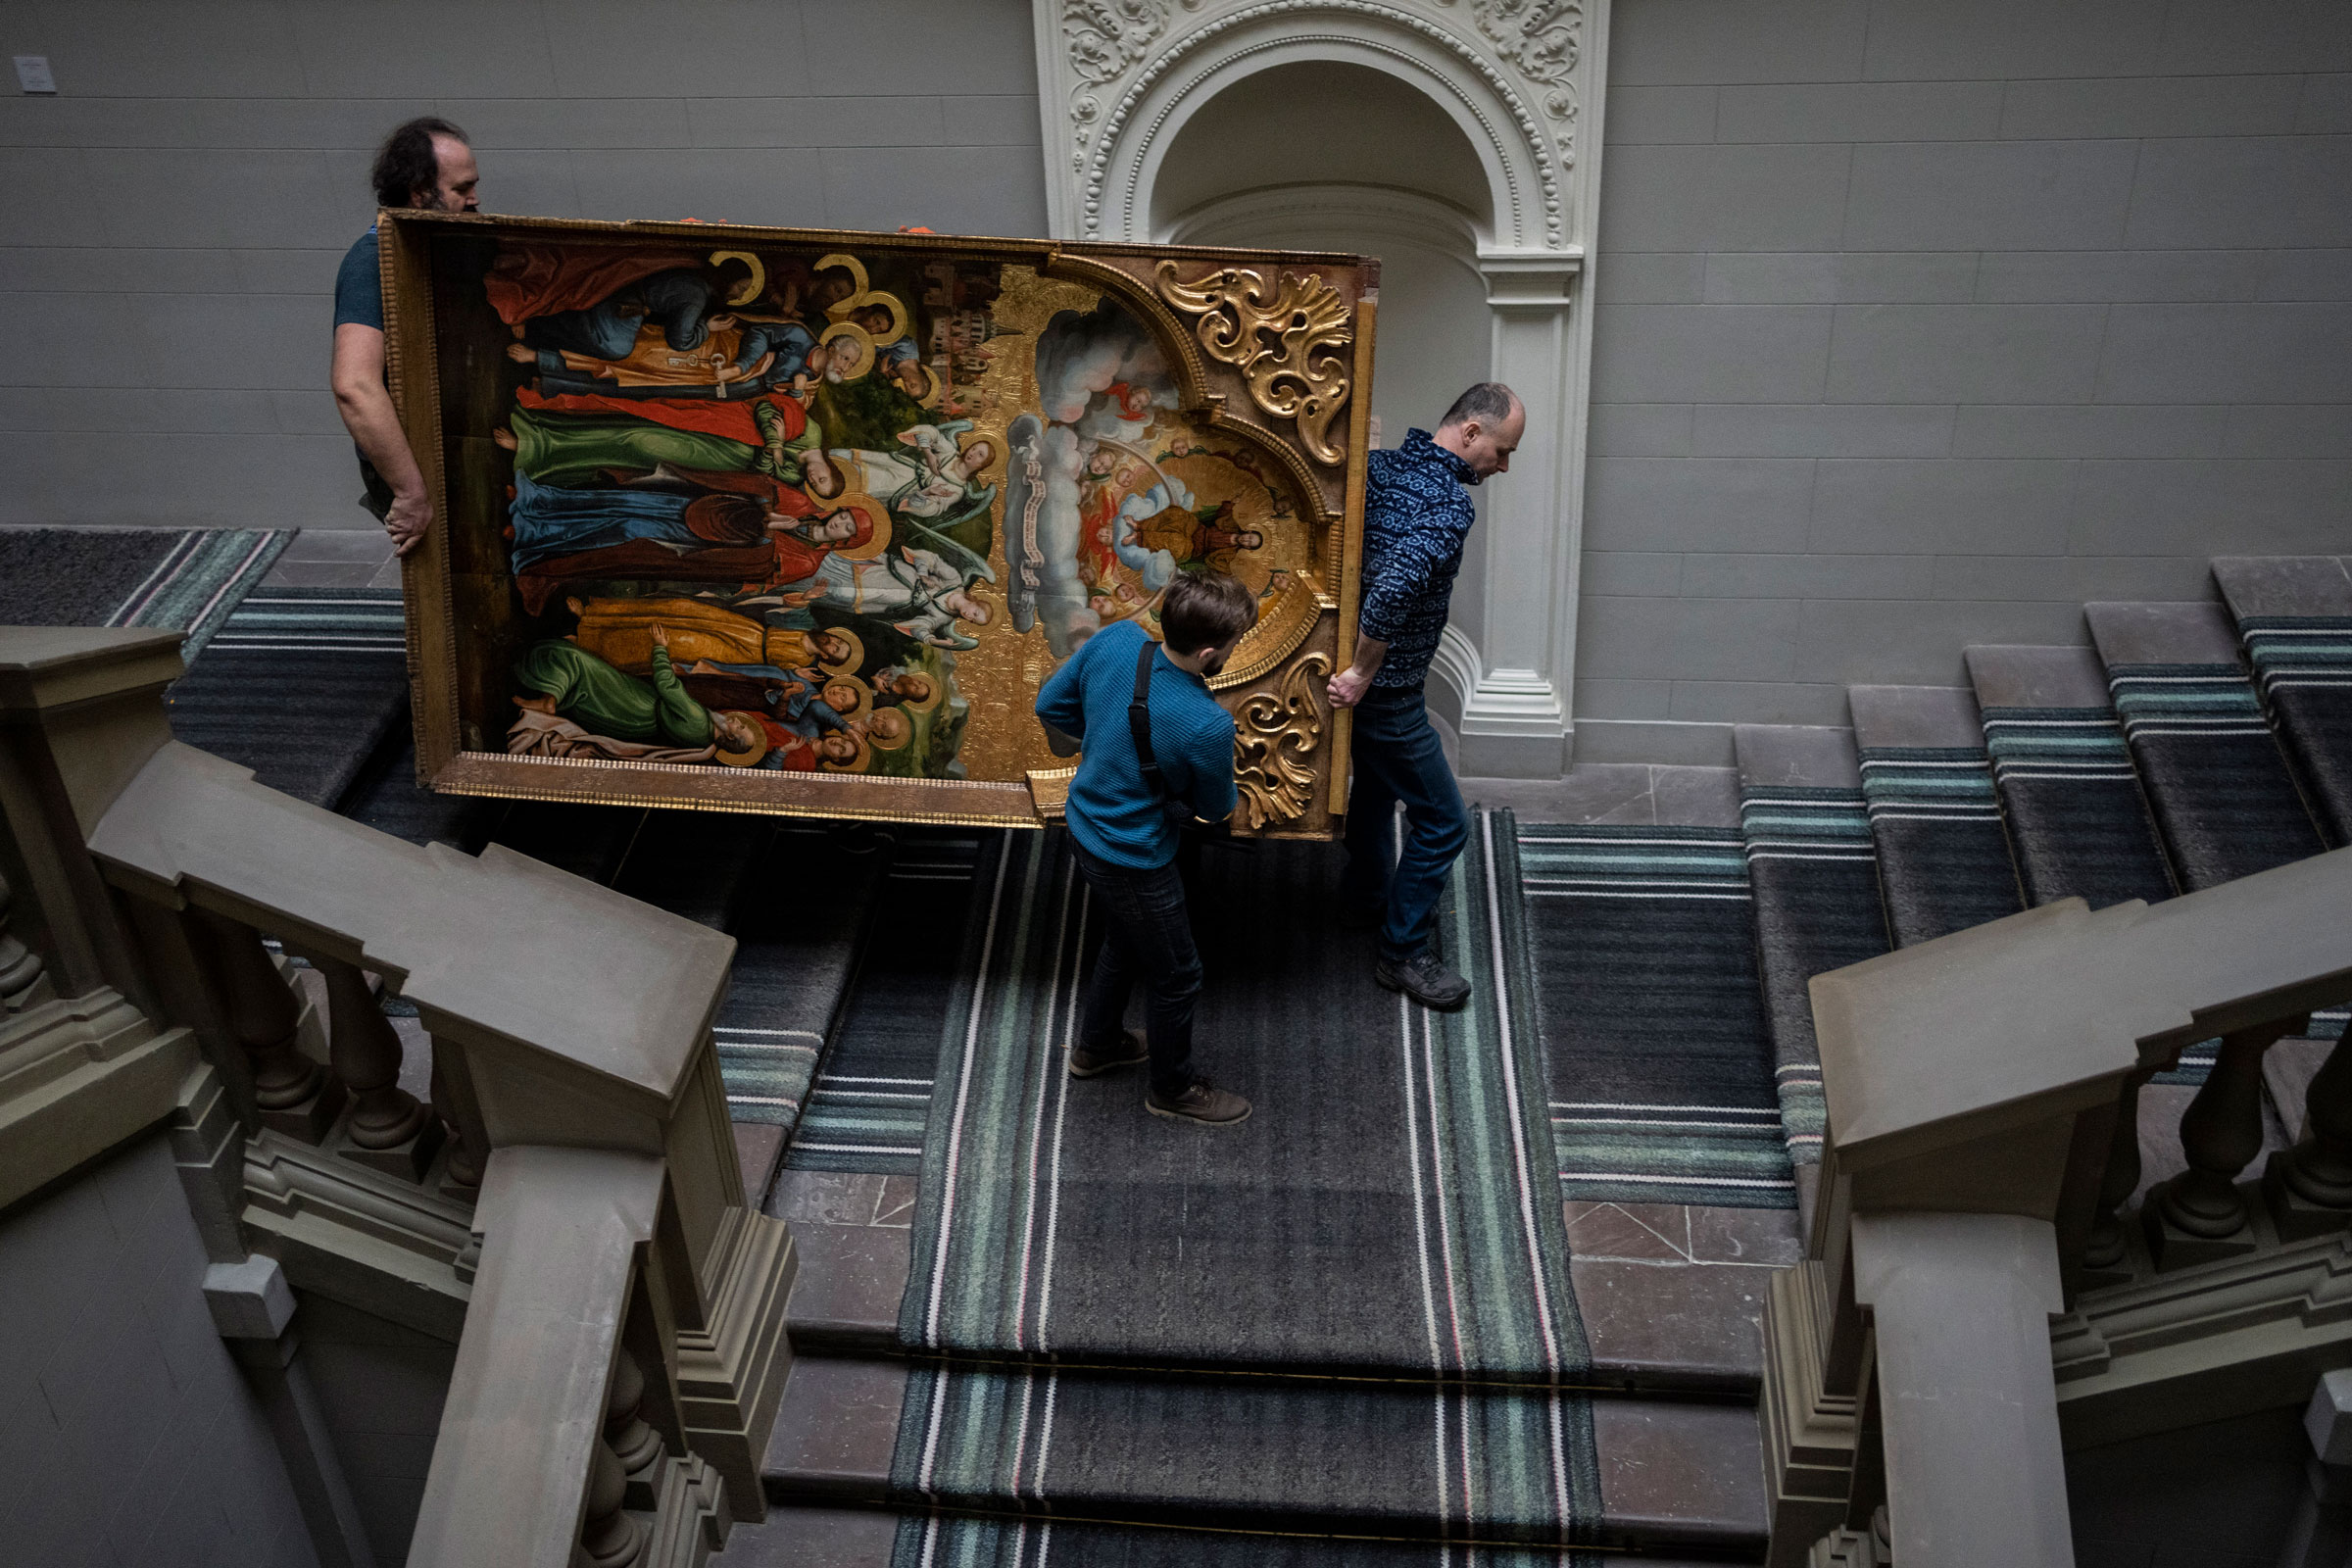 Workers move the Annunciation to the Blessed Virgin of the Bohorodchany Iconostasis in the Andrey Sheptytsky National Museum as part of safety preparations